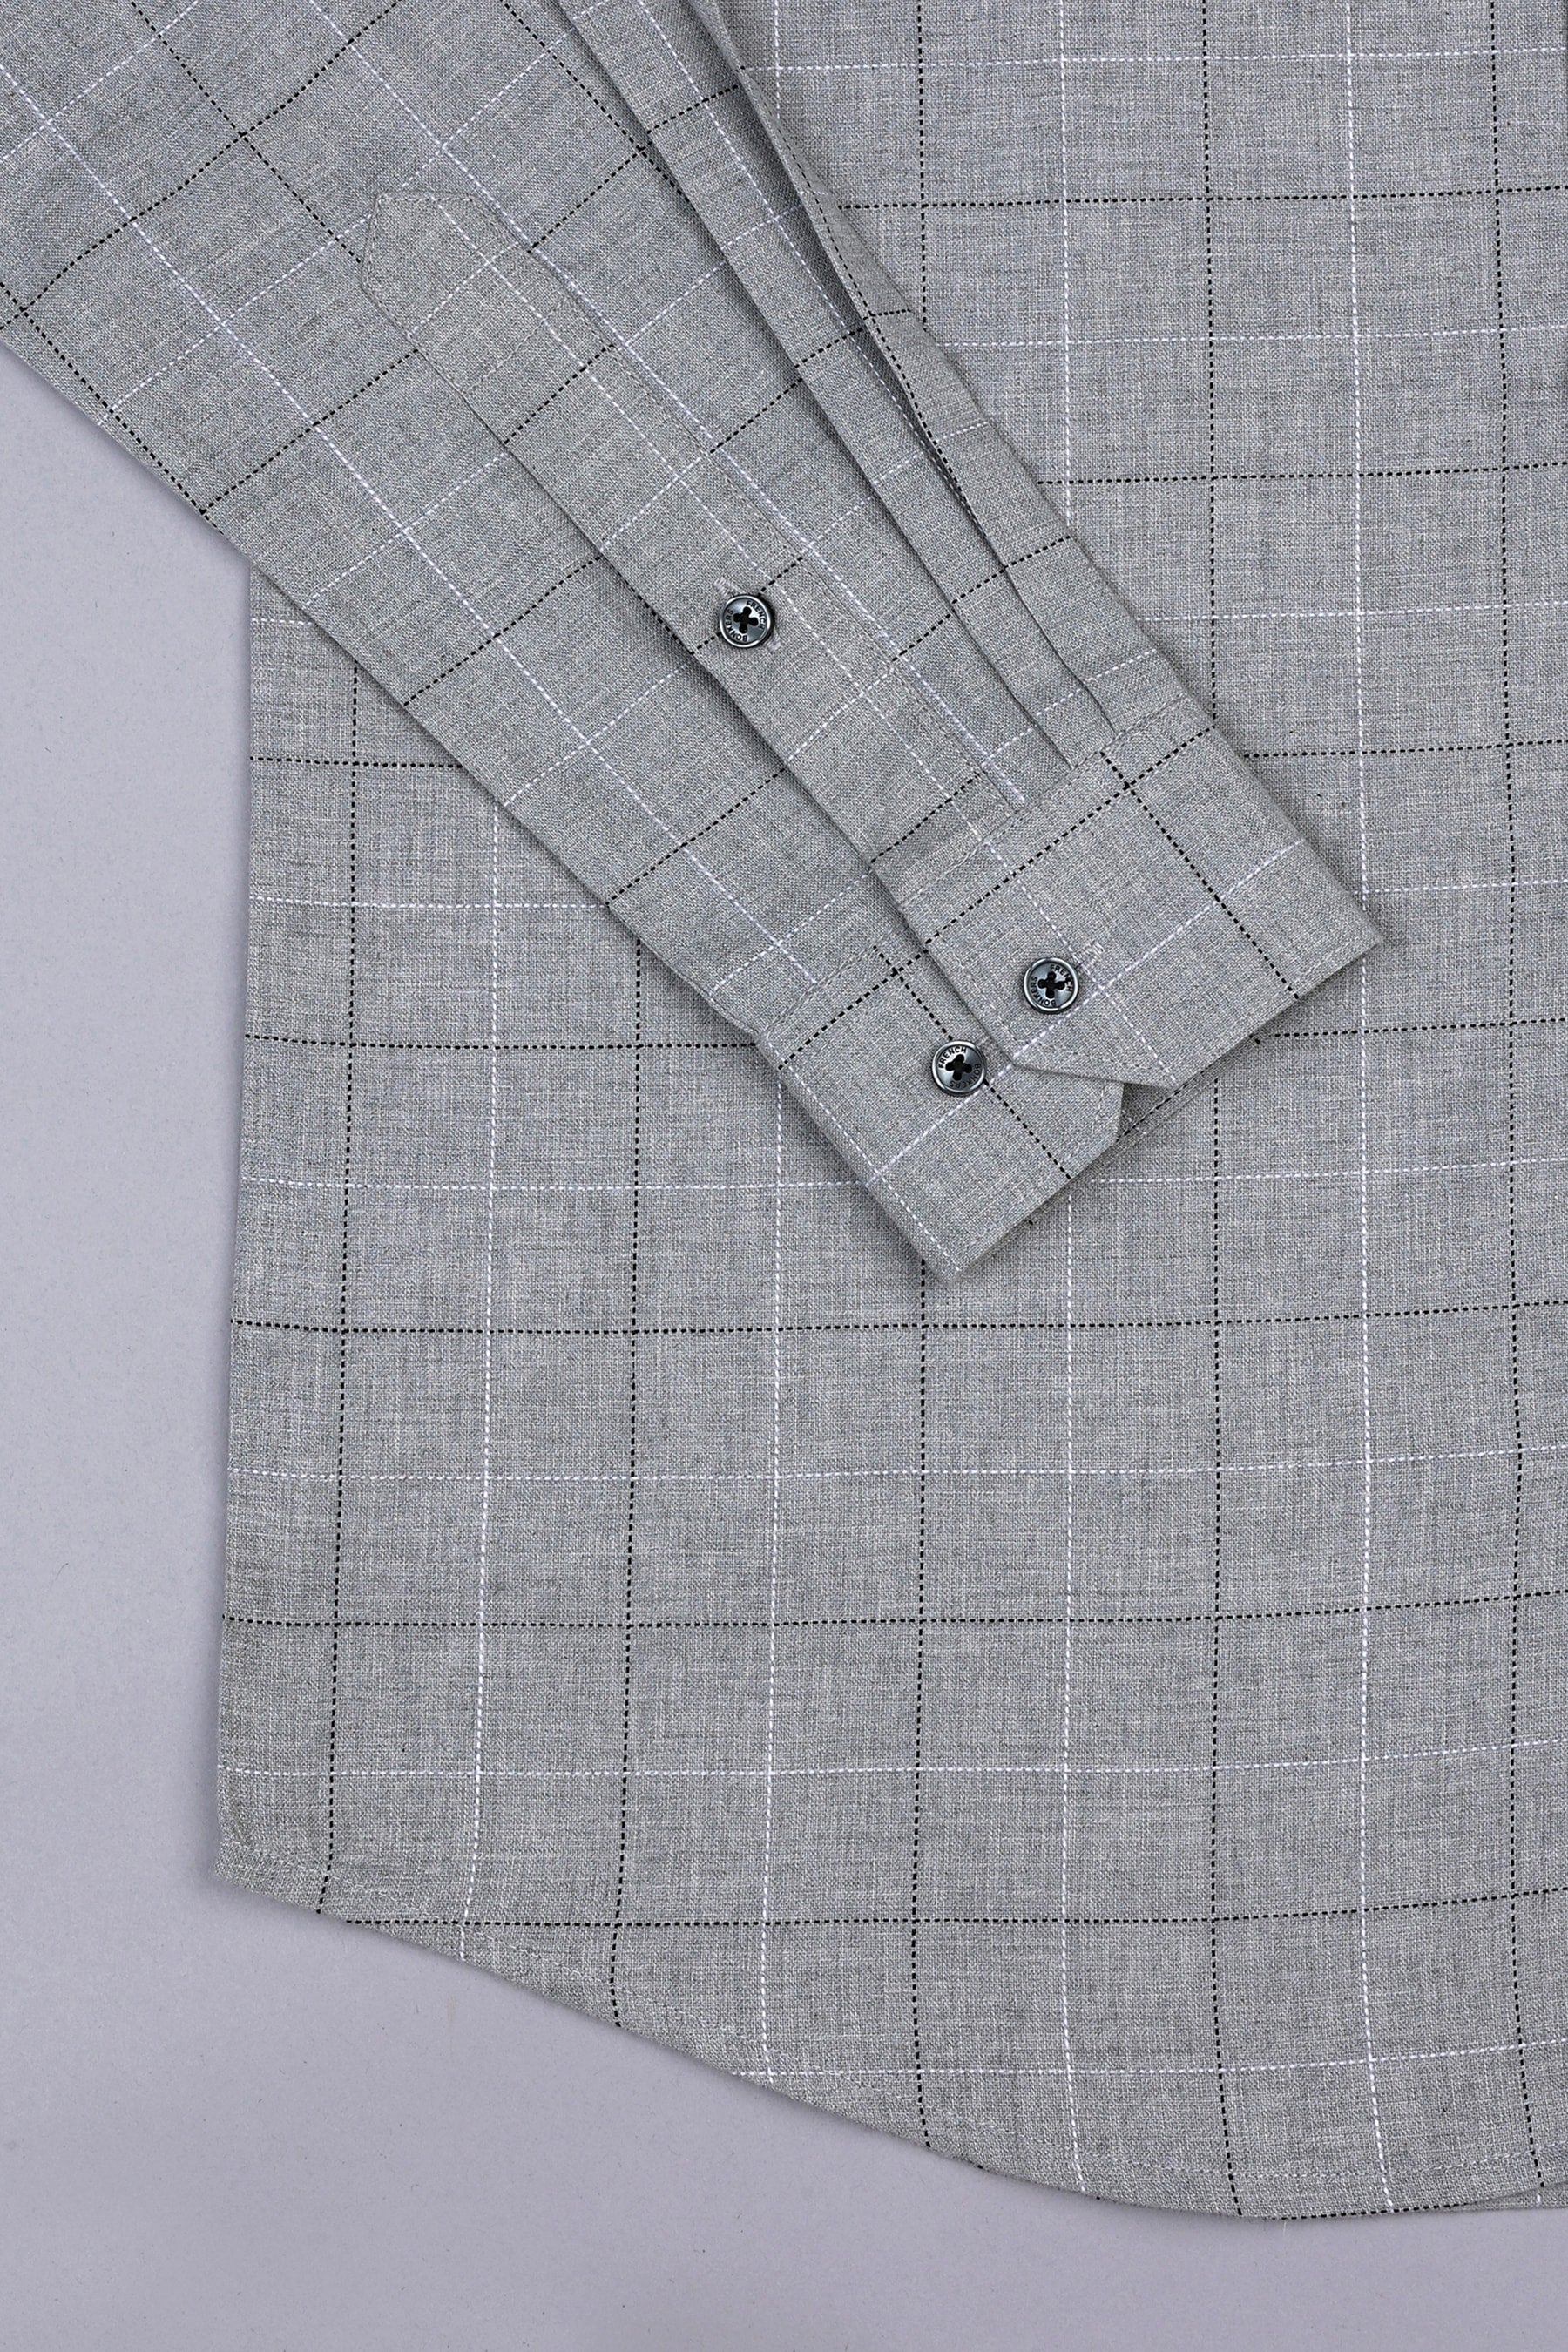 Cement grey with black and white argyle check shirt